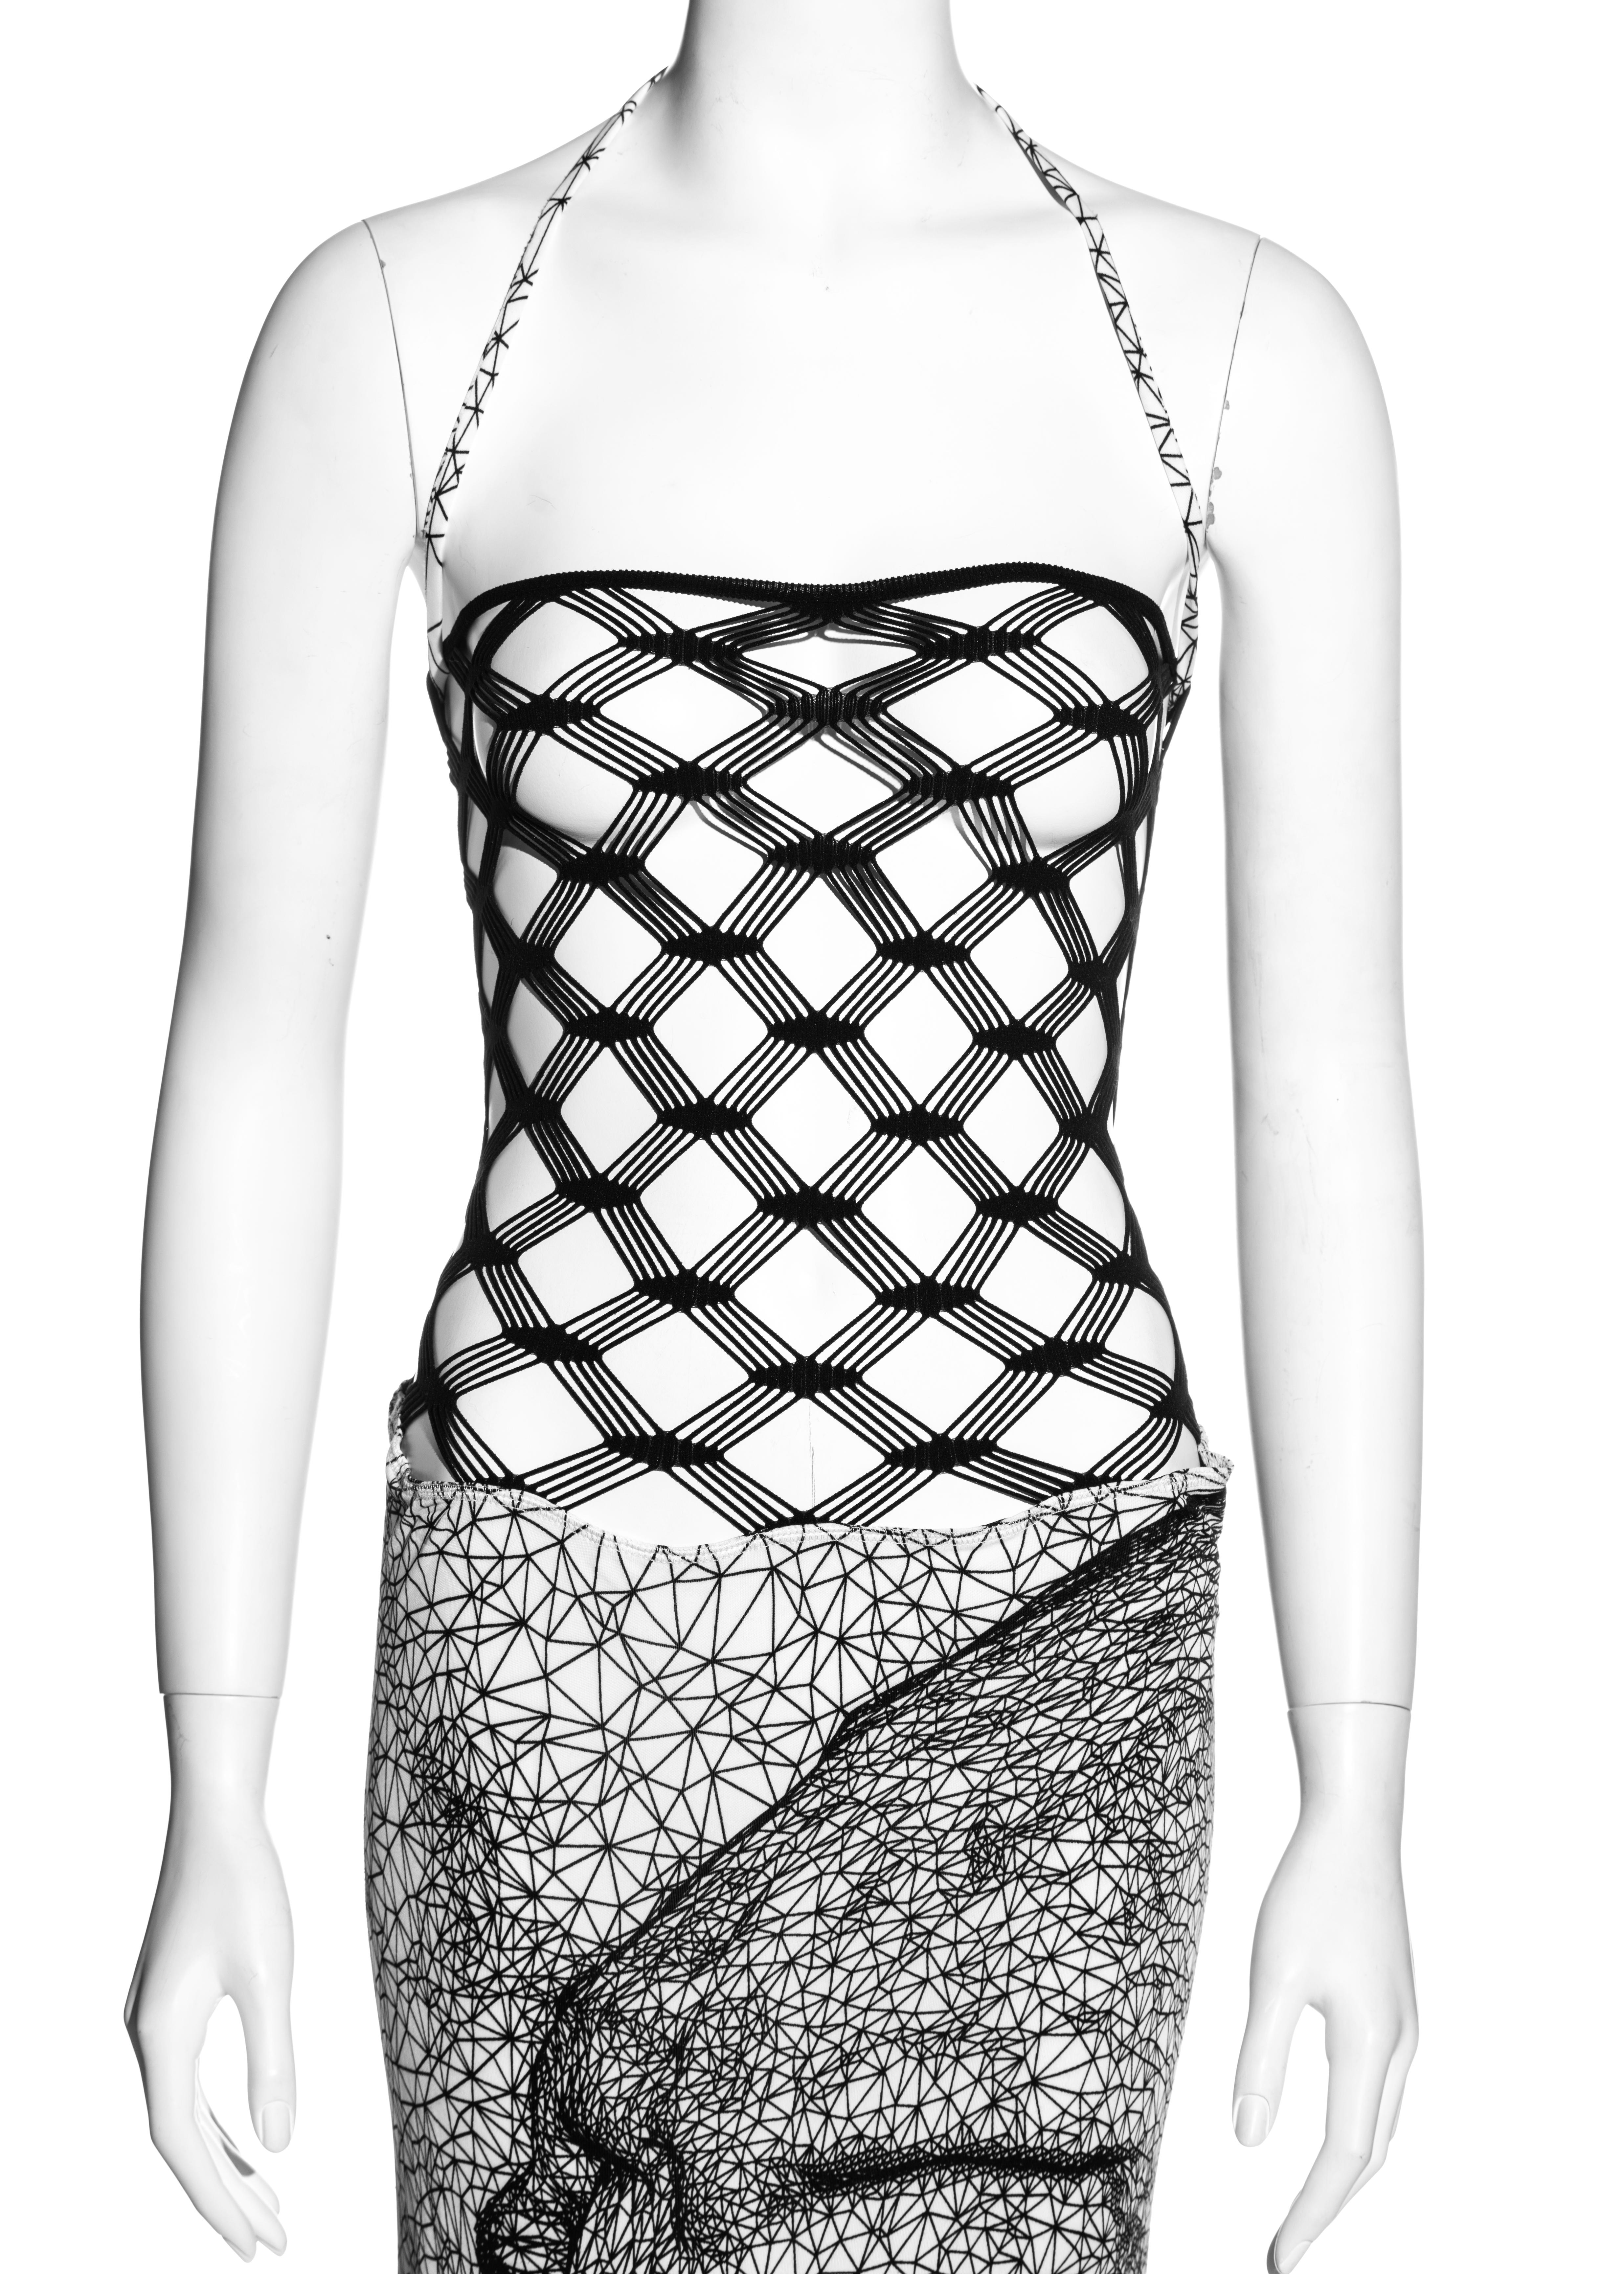 jean paul gaultier black and white dress